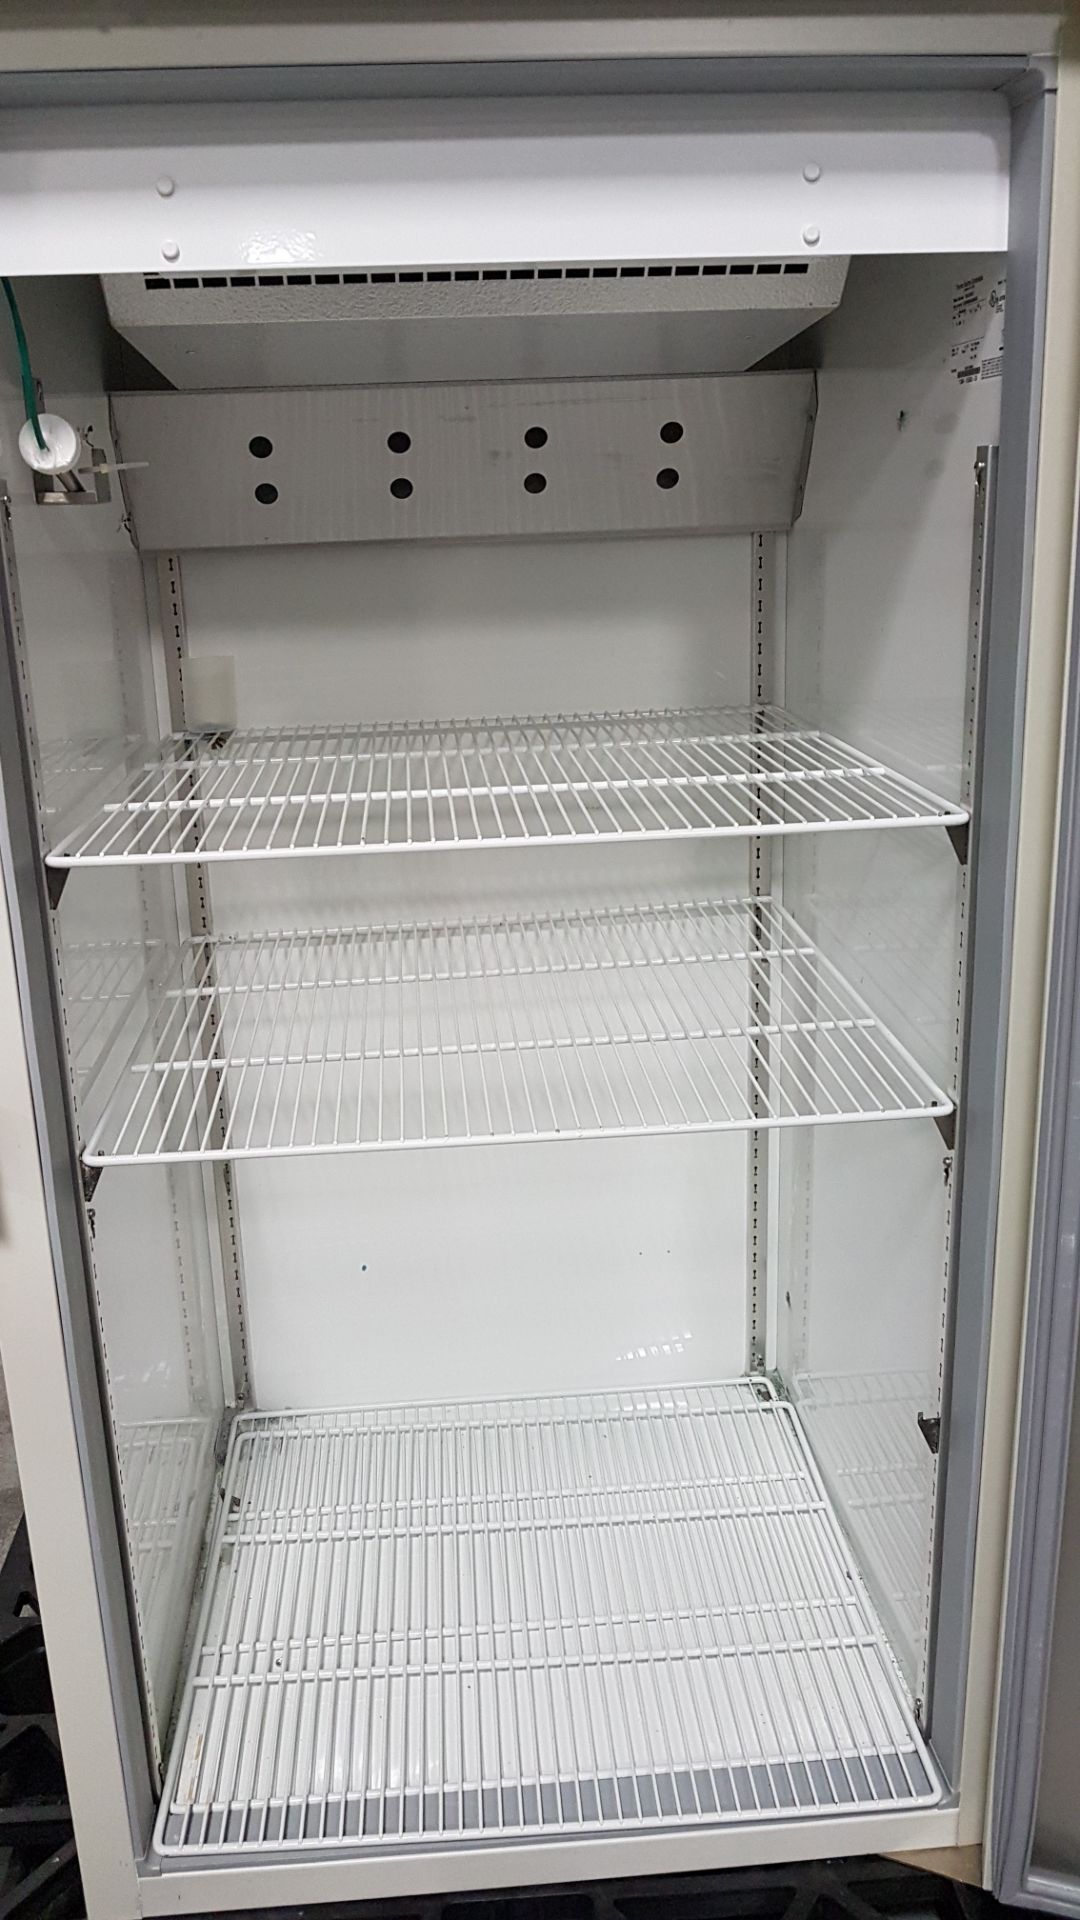 Thermo Electron freezer, model REL3004A21, 29" W x 26" D x 52"H chamber, 115 volts. - Image 12 of 18